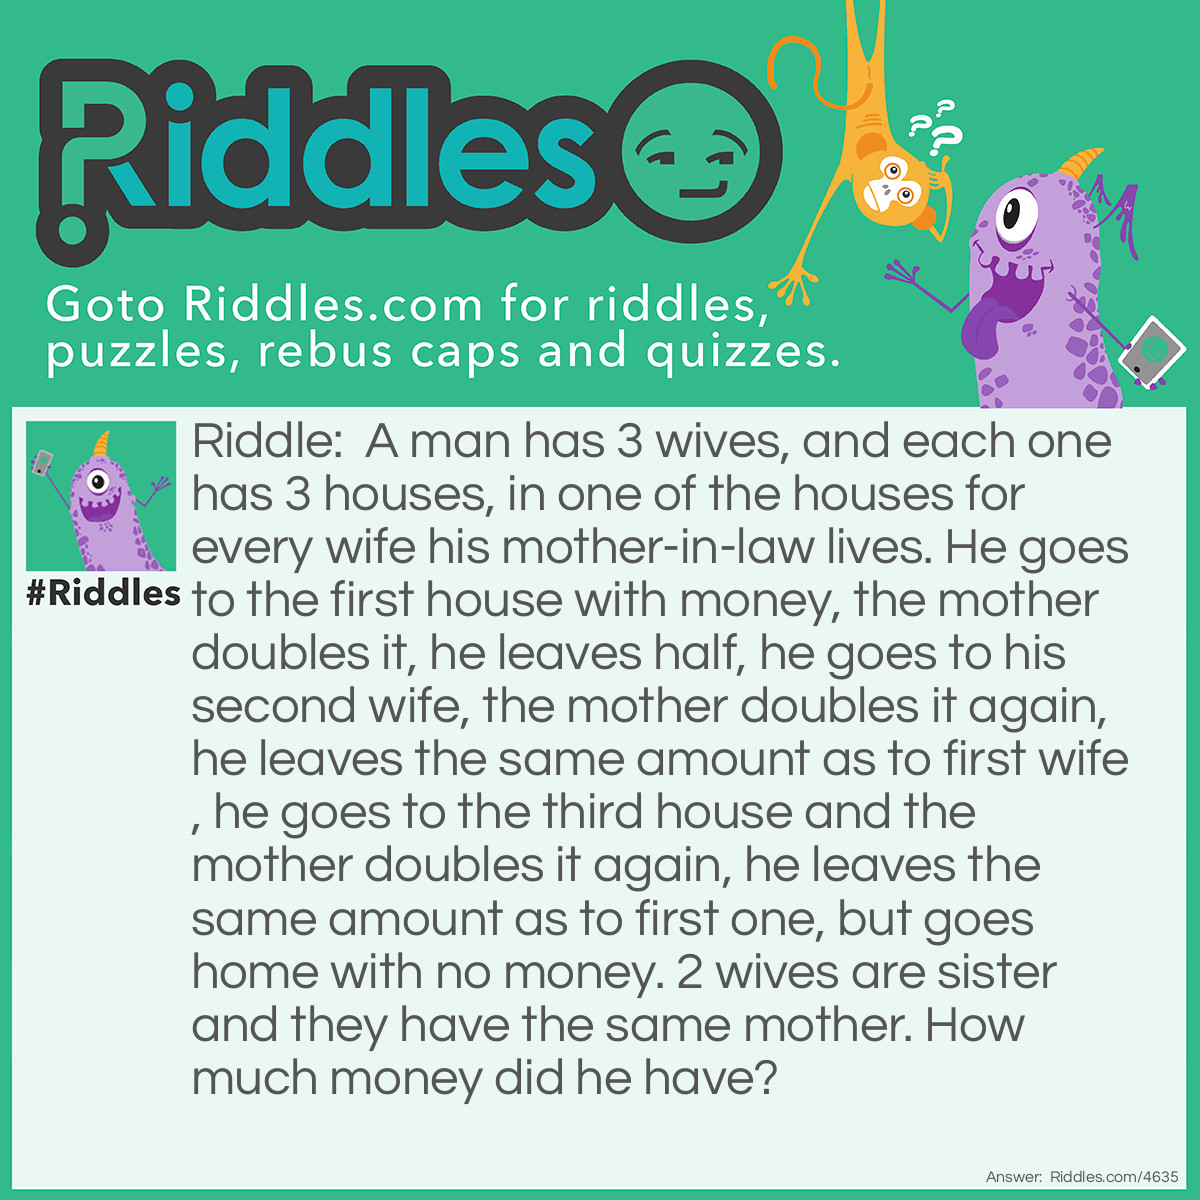 Riddle: A man has 3 wife's, each one has 3 houses, in one of houses for every wife his mother in law lives. He goes to first house with money, mother doubles it, he leaves half, he goes to second wife, mother doubles it again, he leaves the same amount as to first wife, he goes to third house and mother doubles it again, he leaves the same amount as to first one,but goes home with no money. How much money did he have? 2 wife are sister and they have a same mother? Answer: I don't now the answer if someone now that plz leave a comment